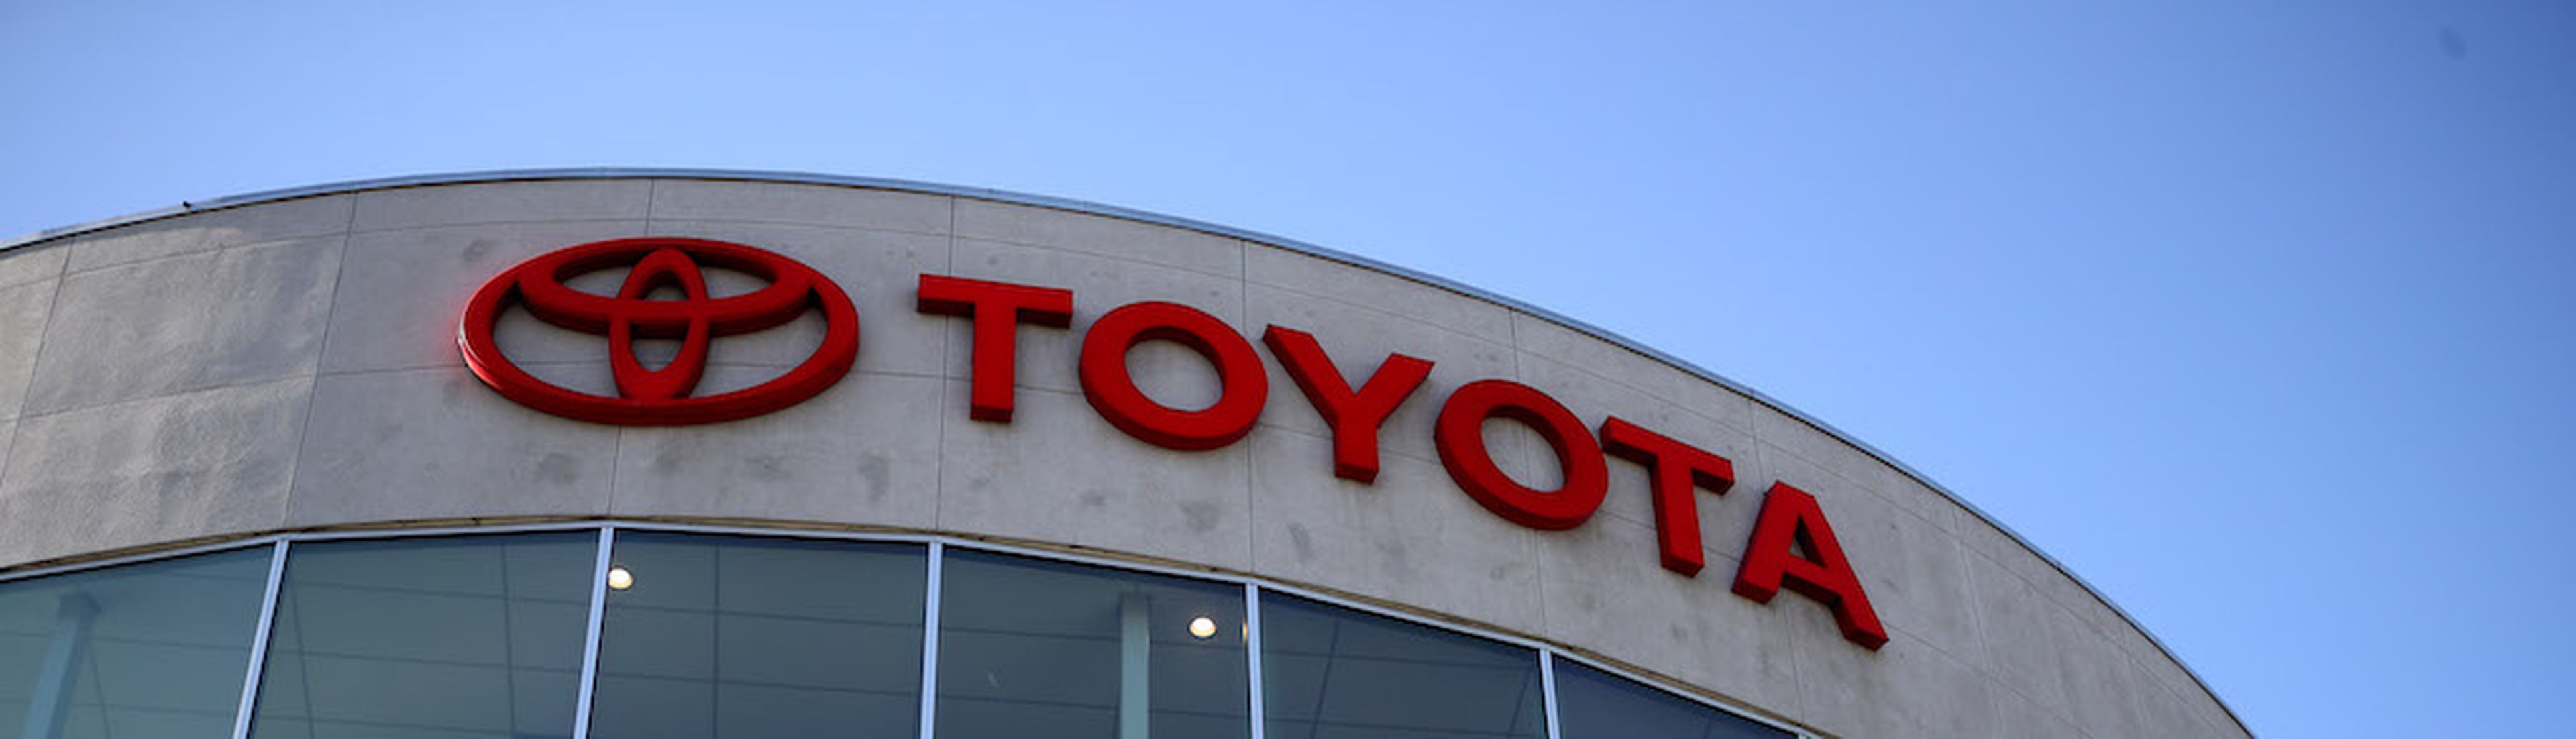 OAKLAND, CALIFORNIA &#8211; FEBRUARY 06:
The Toyota logo is displayed at One Toyota of Oakland on February 06, 2019 in Oakland, California. Toyota reported a $12.6 billion loss in third quarter profits even though sales of popular vehicles like the Camry were slightly up. (Photo by Justin Sullivan/Getty Images)